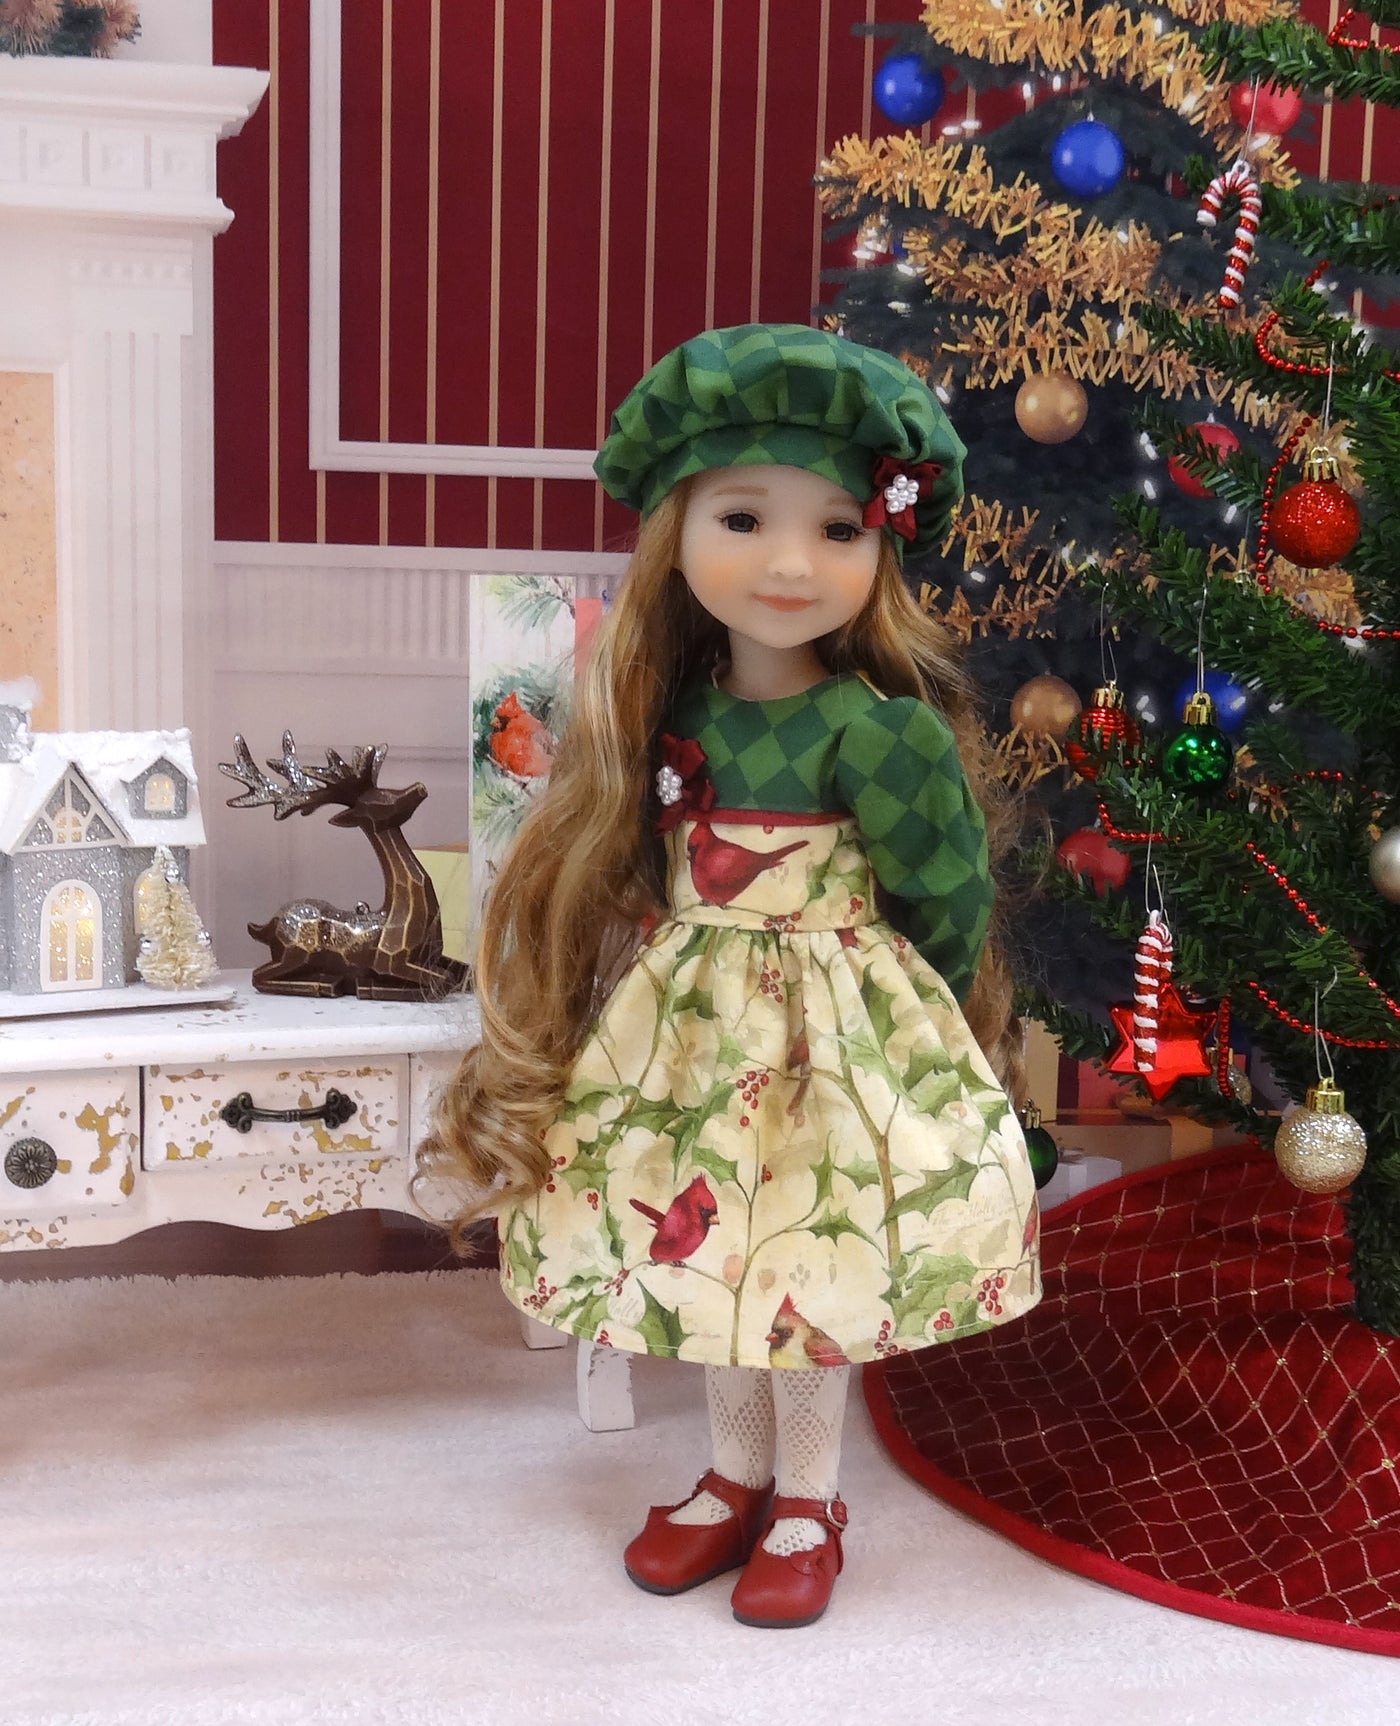 Elegant Cardinal - dress ensemble with shoes for Ruby Red Fashion Friends doll